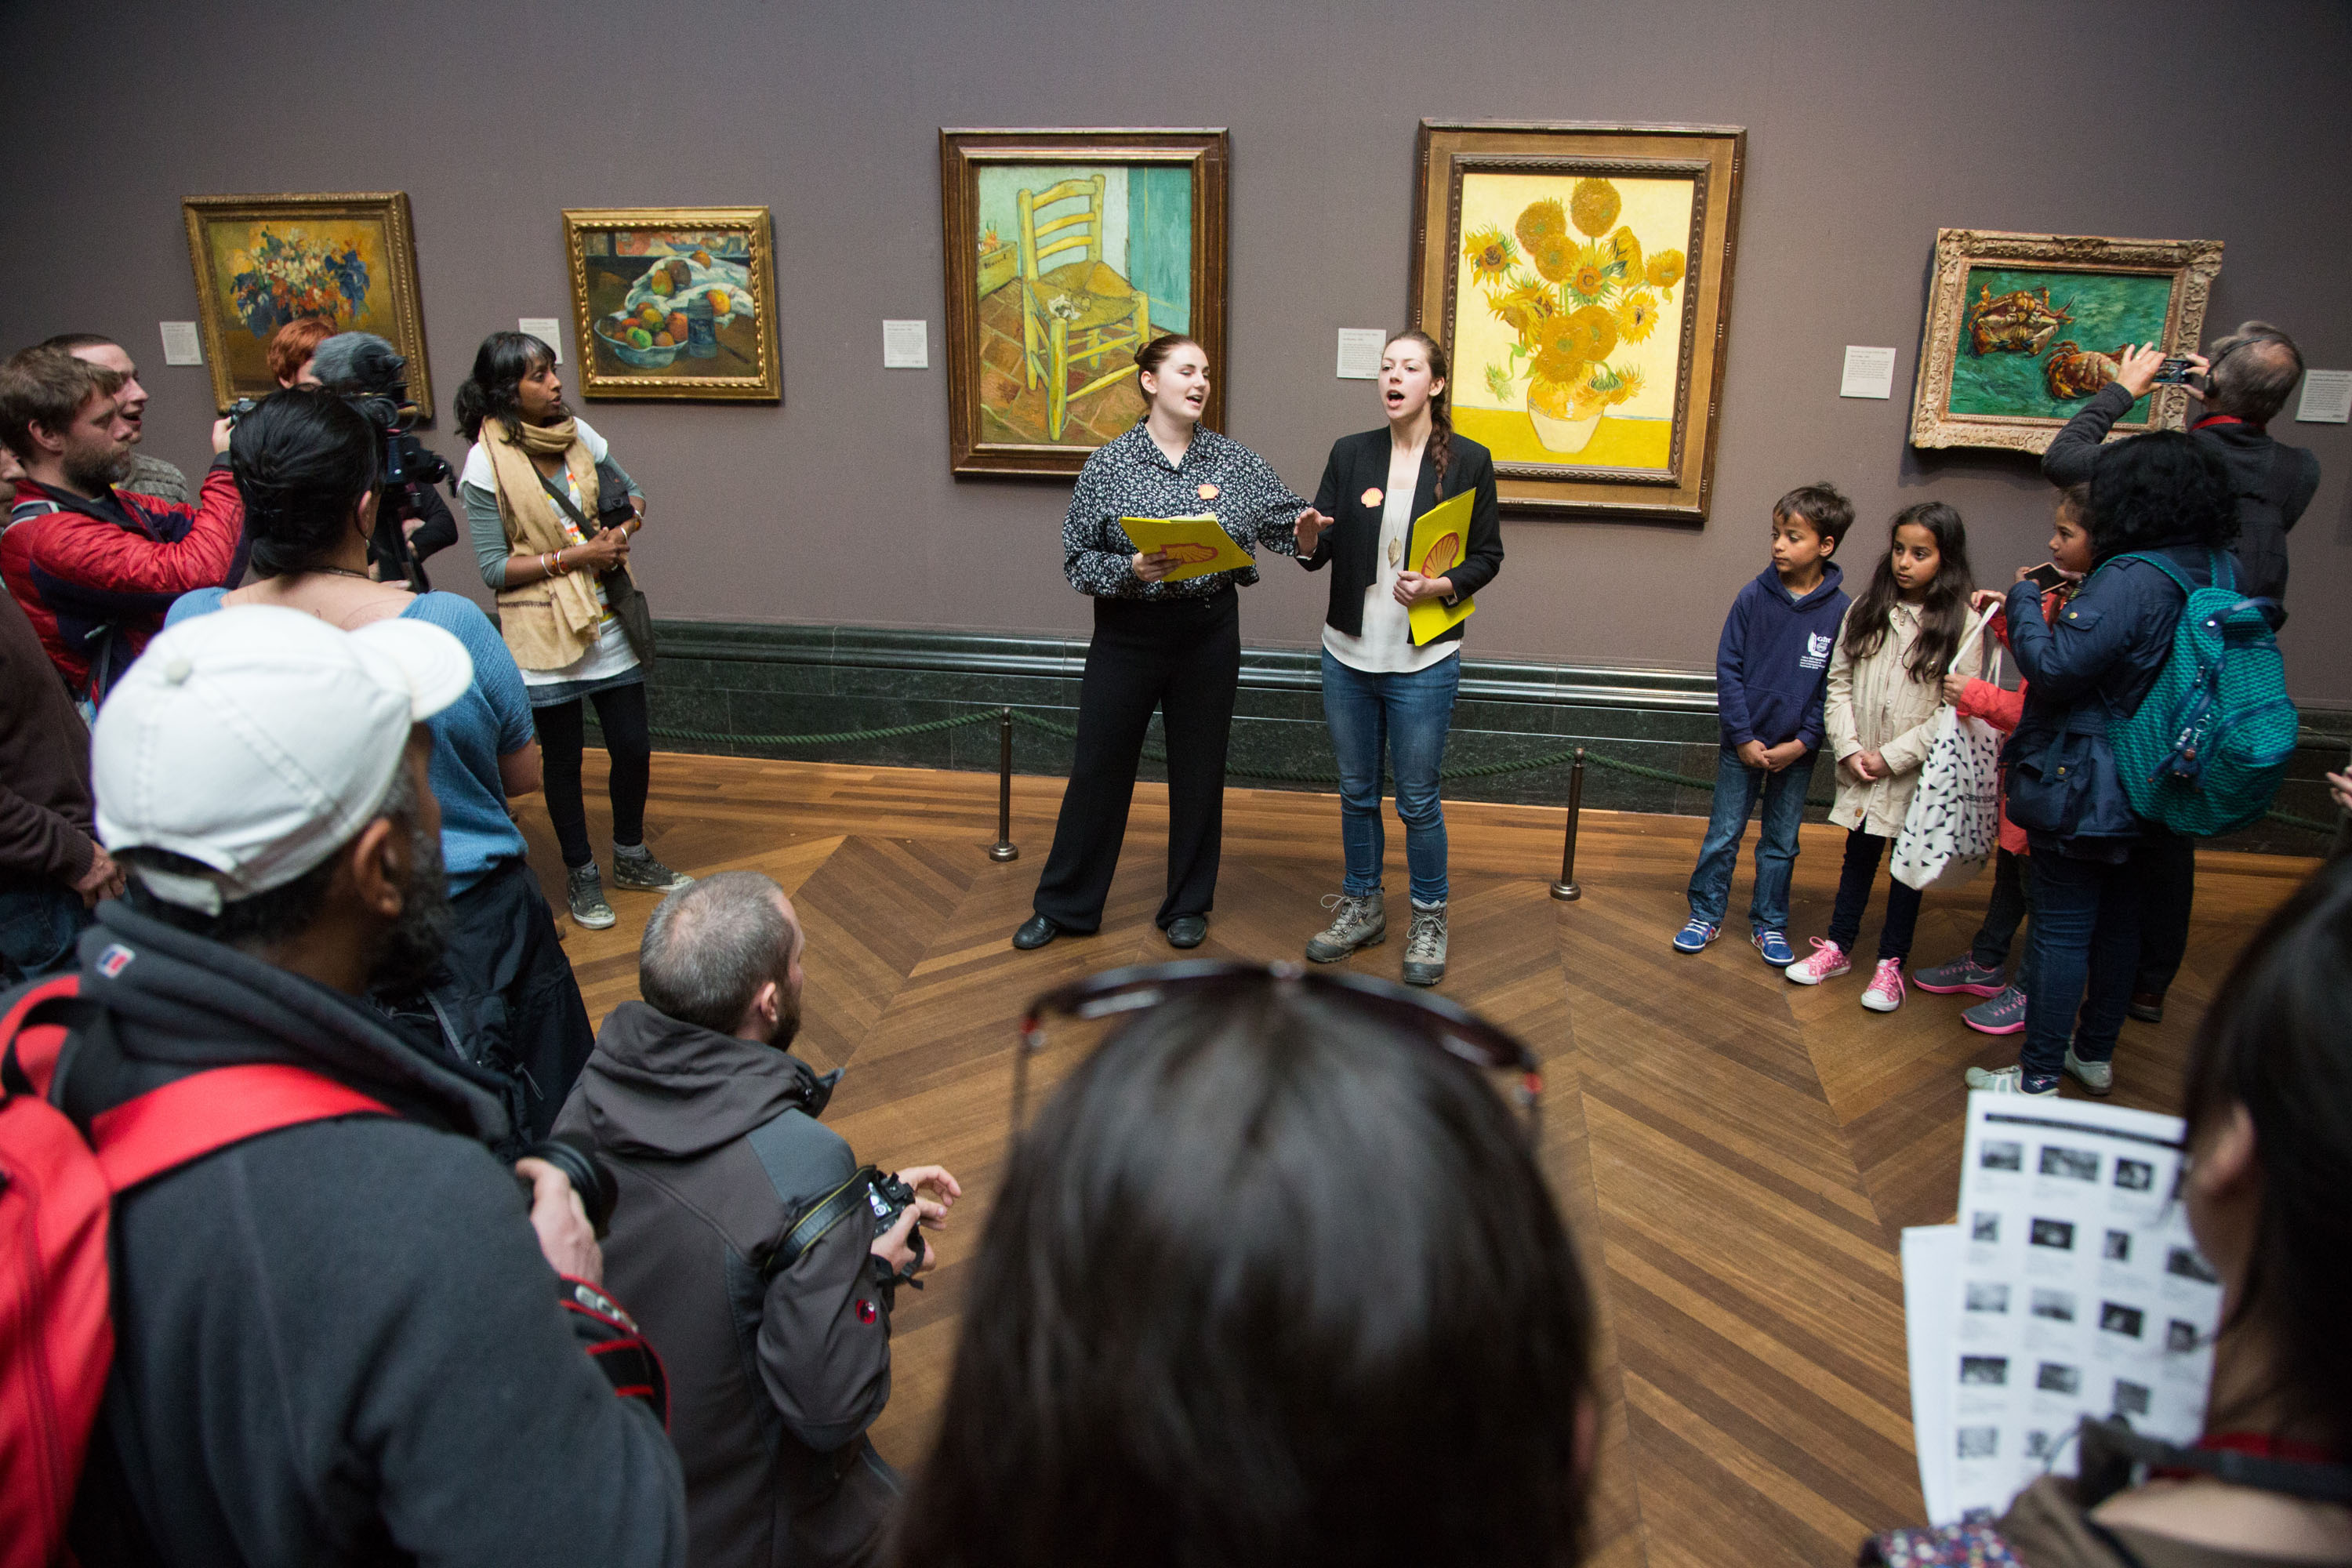 Campaigners Storm Van Gogh S Sunflowers Room In National Gallery Protest Bp Or Not Bp